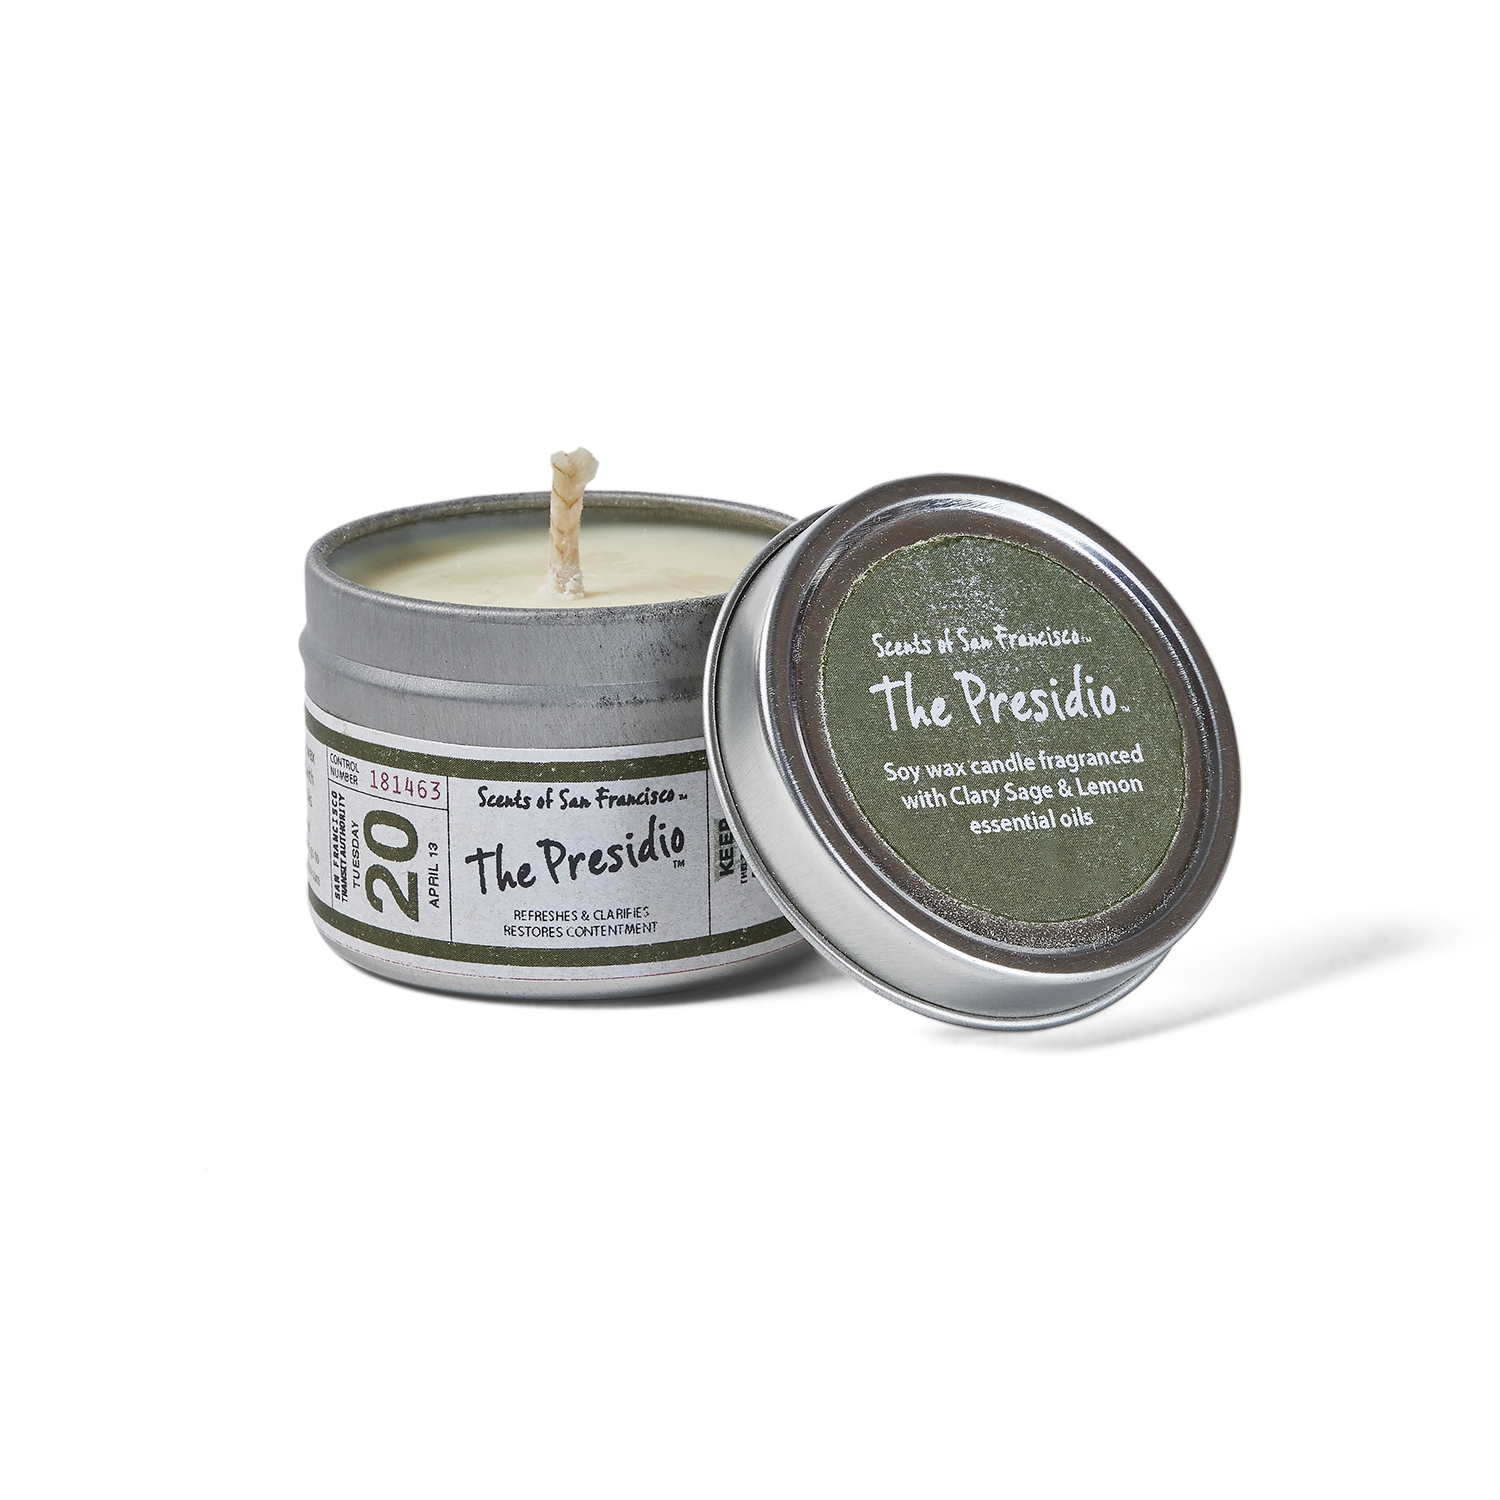 Scents of San Fransisco, Presidio Travel Candle